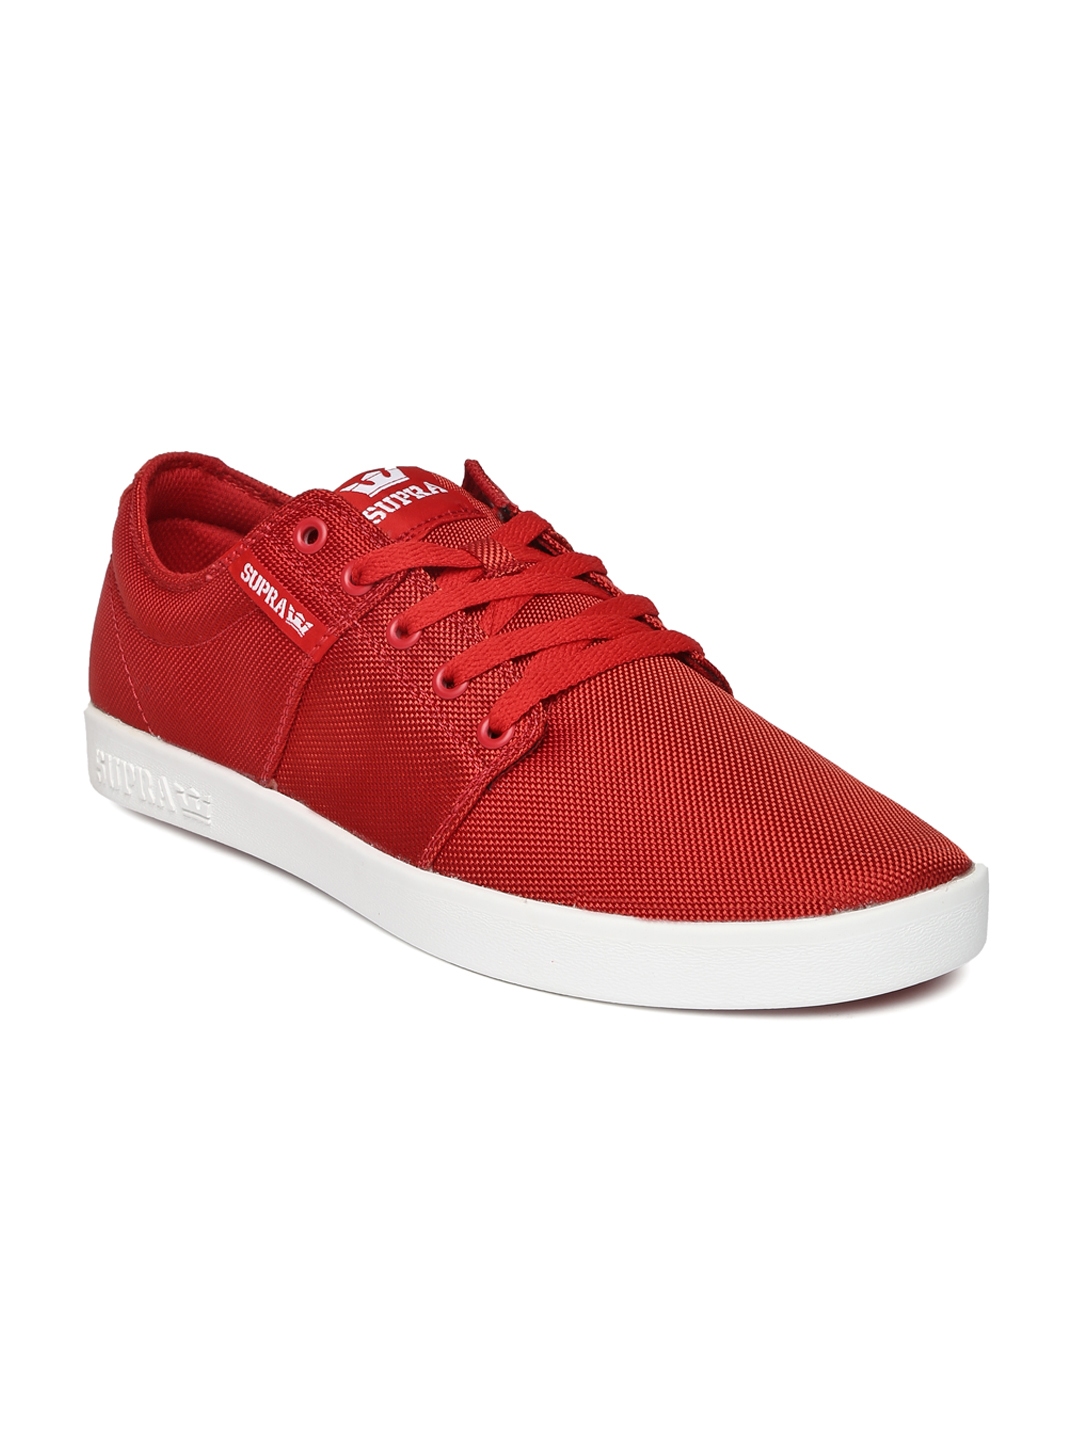 Buy Supra Men Red Casual Shoes - Casual Shoes for Men 951057 | Myntra